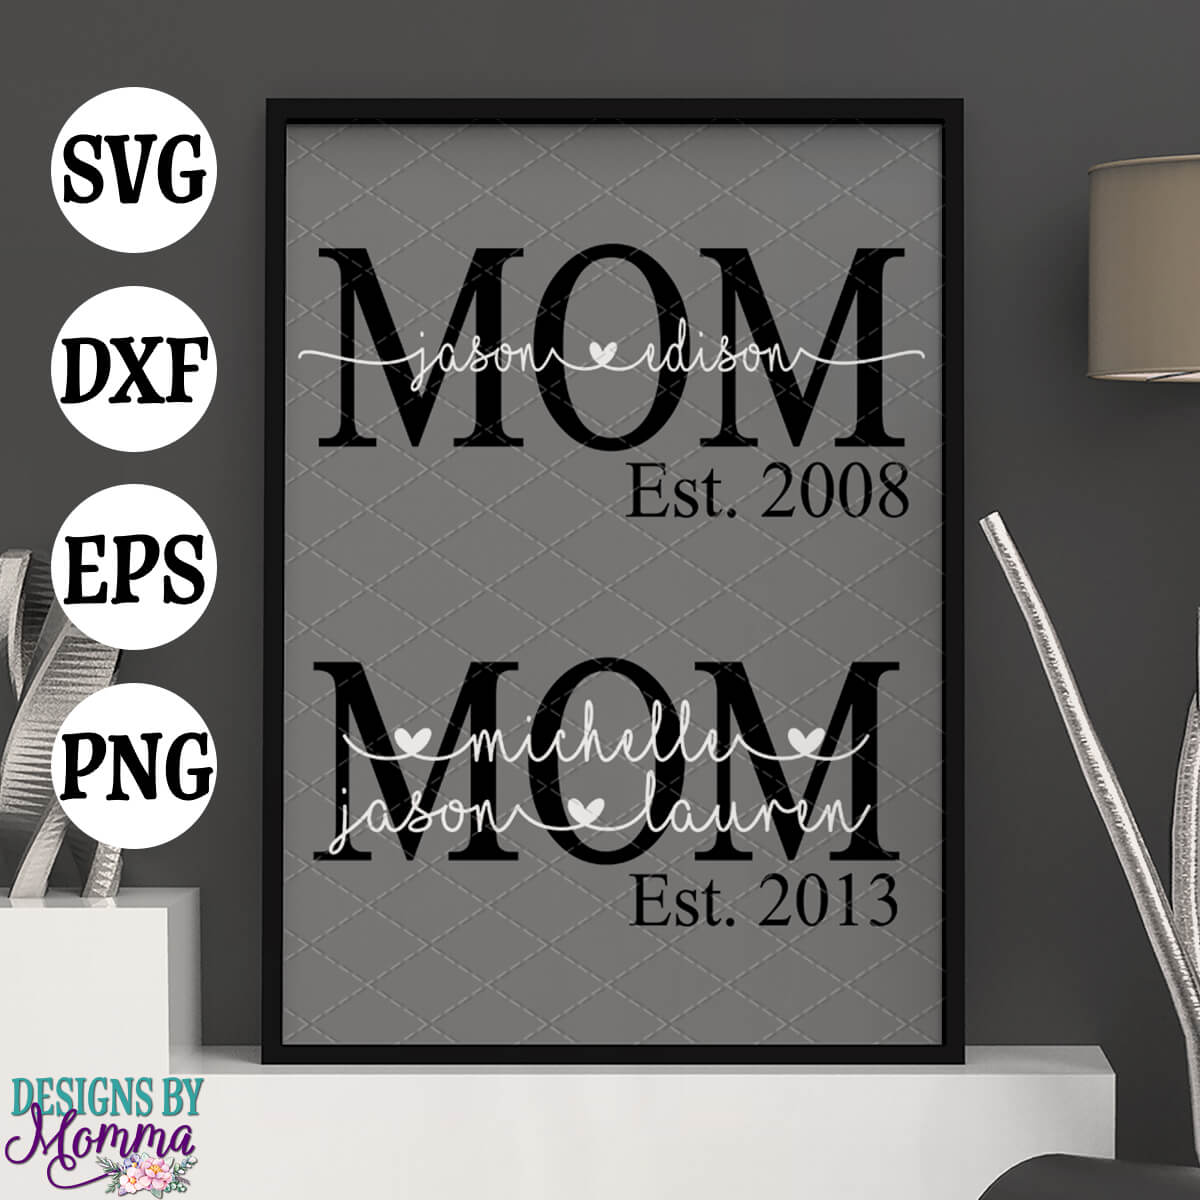 Download Custom MOM with childrens names and year SVG DXF EPS PNG - Designs by Momma